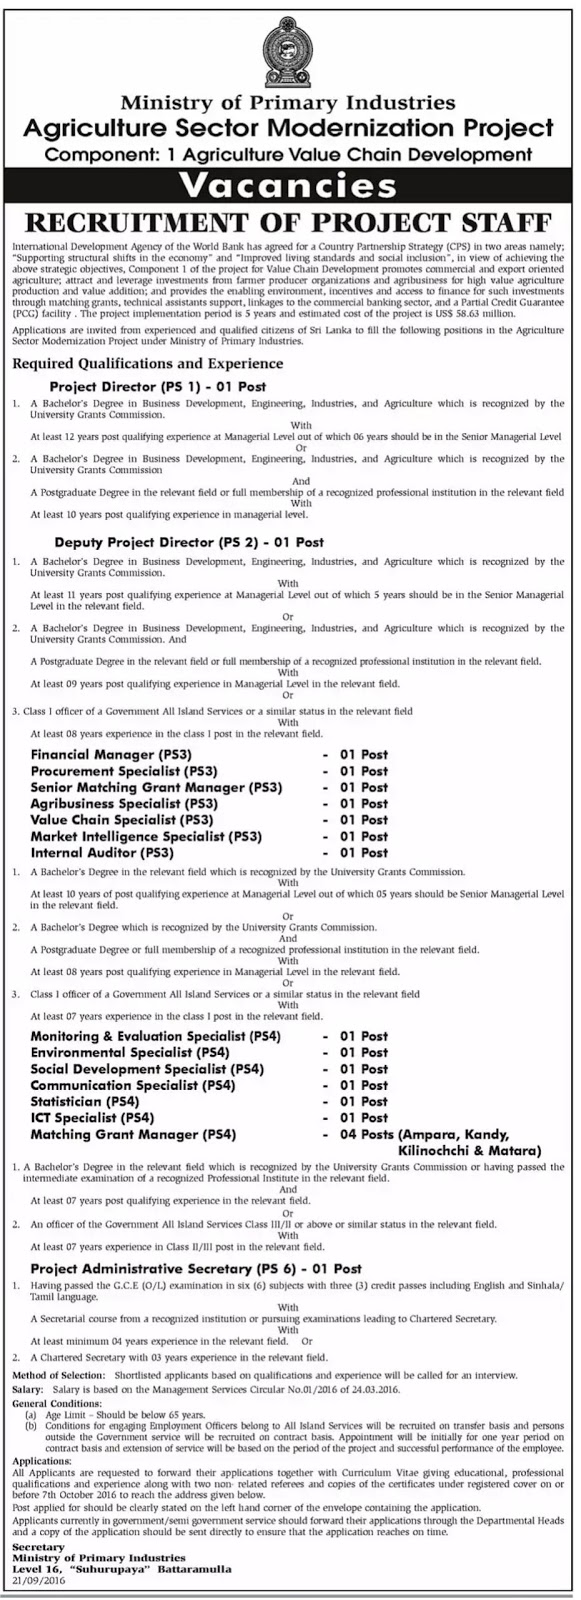 Ministry of Primary Industries Project Sri Lanka Vacancies